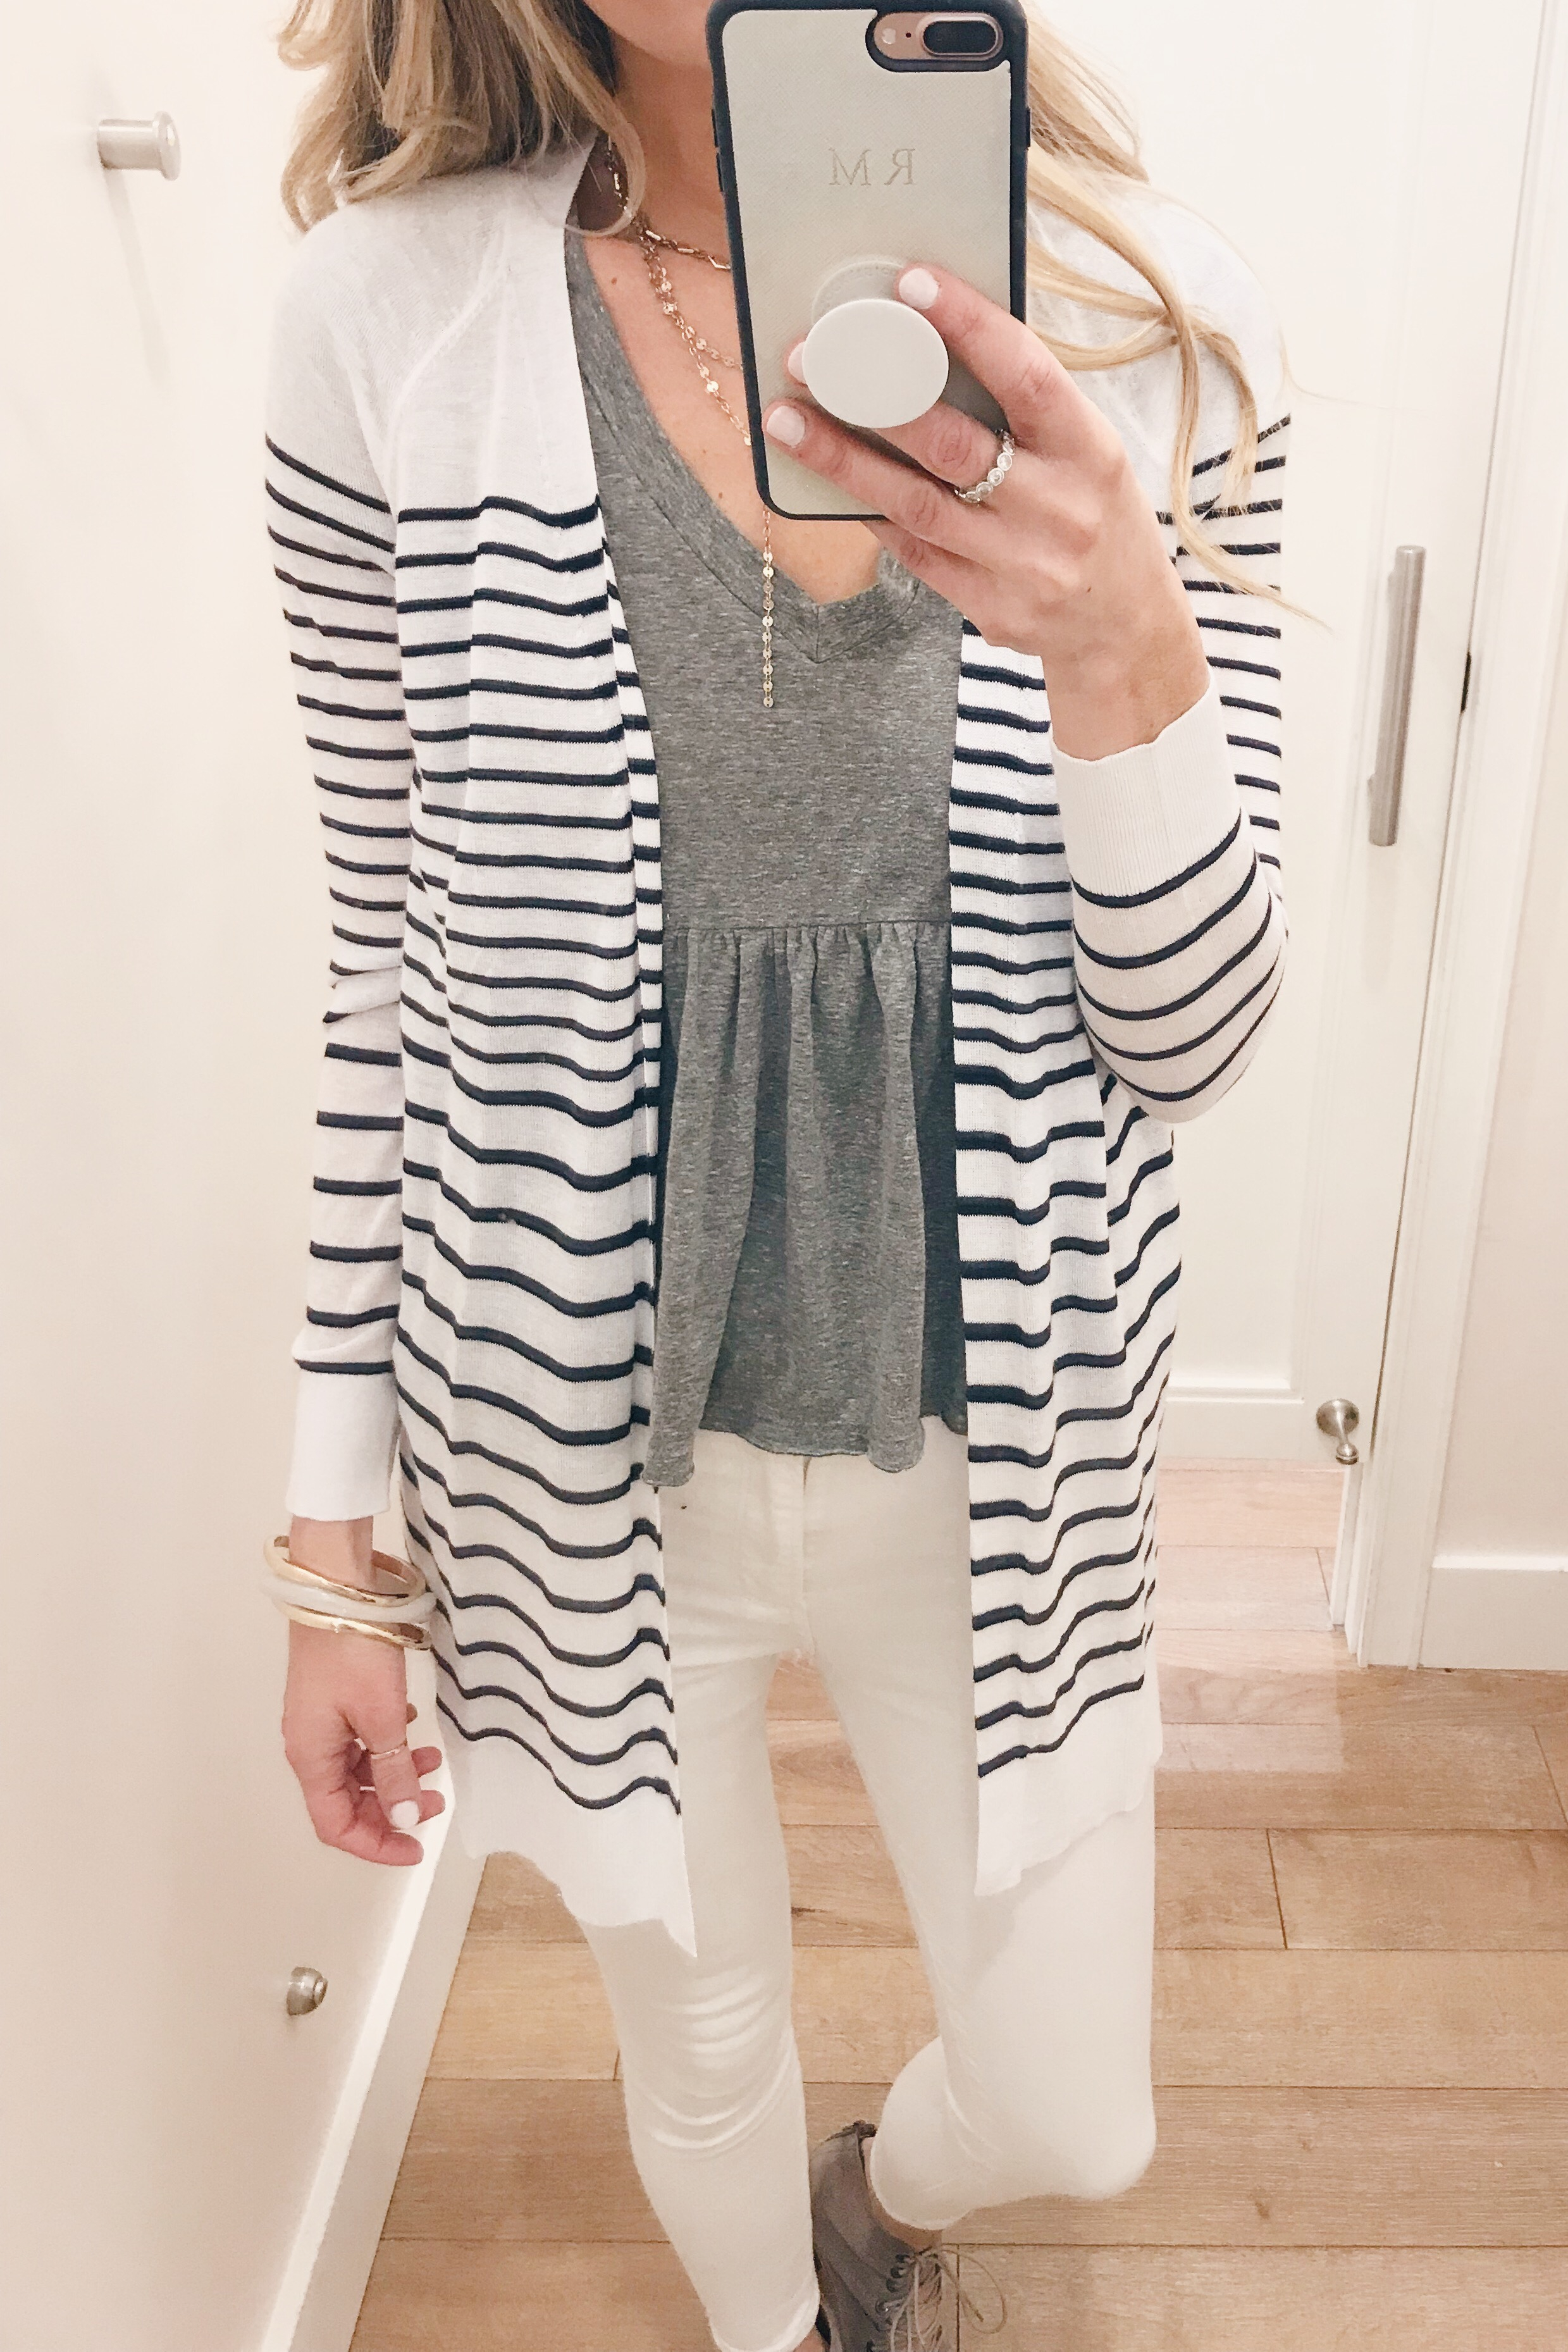 poor quality striped cardigan - pass on this one - Pinteresting Plans blog